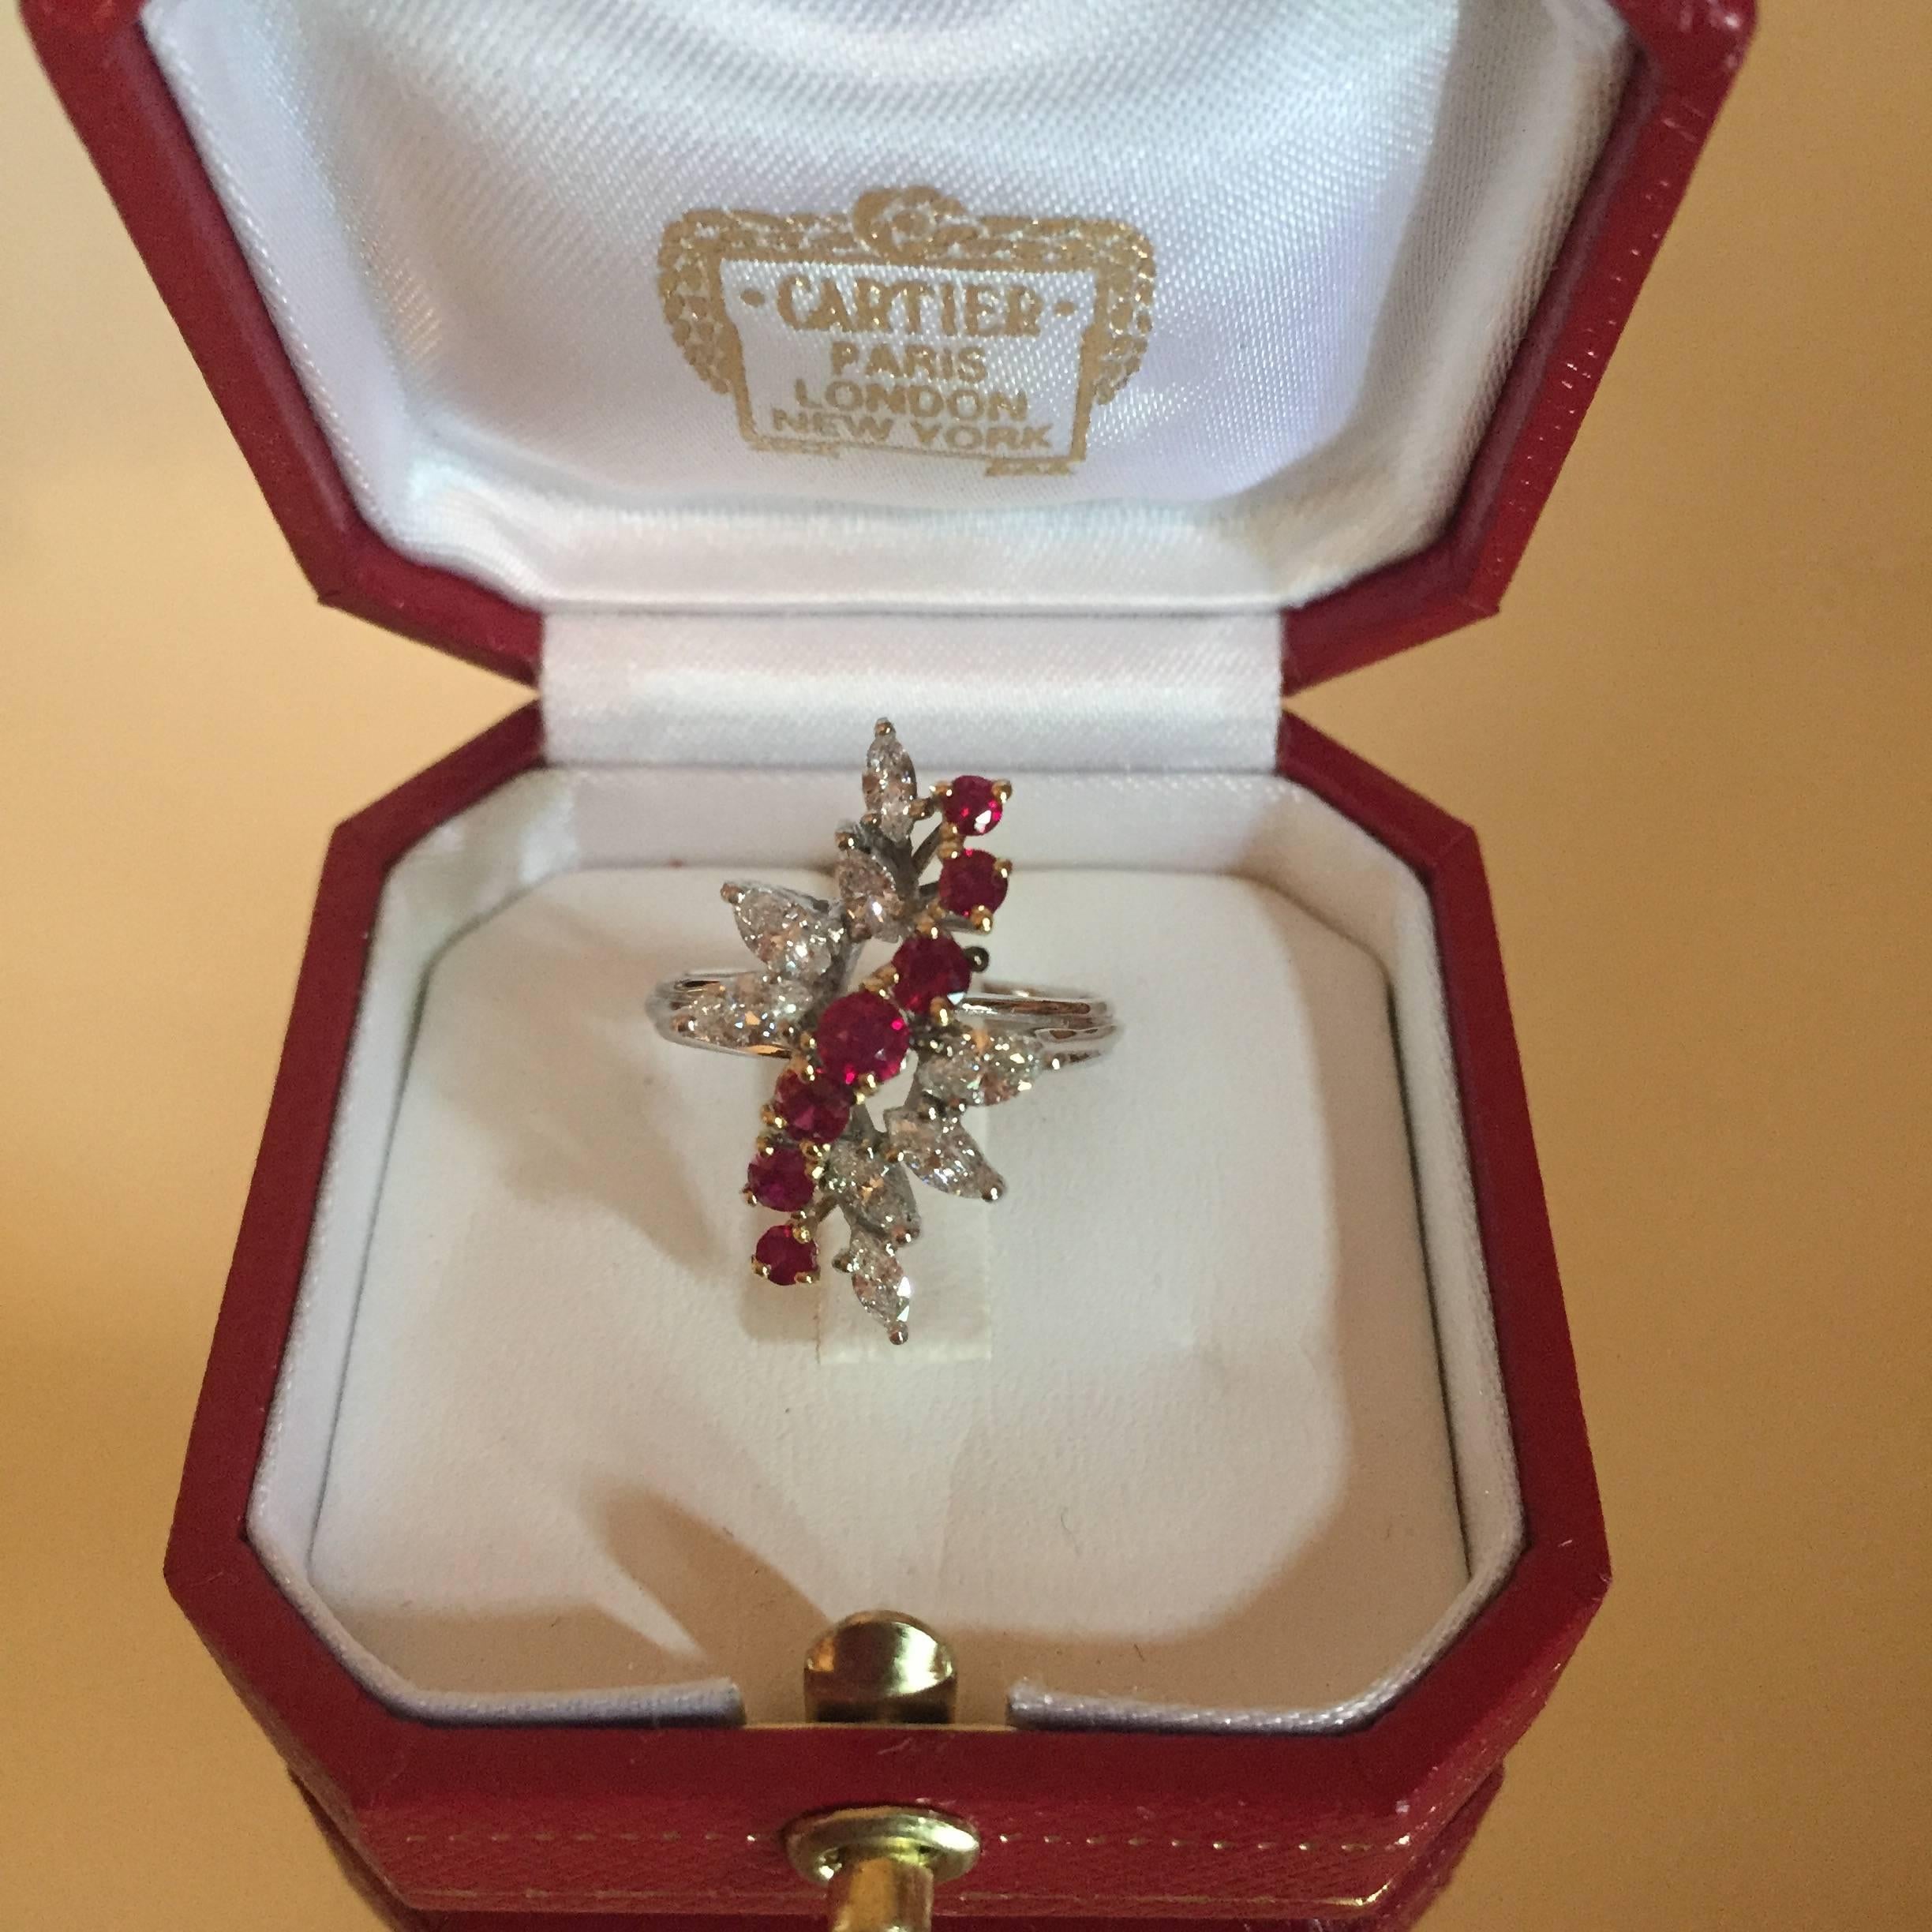 Vintage Cartier 18KT white and yellow gold diamond and ruby cocktail ring. Ring contains approximately 1.OOCTS. in diamonds and approximately .40CTS. in rubies. Diamonds are F - G in color and VVS - VS in clarity. Ring is a size 6 and it can be re